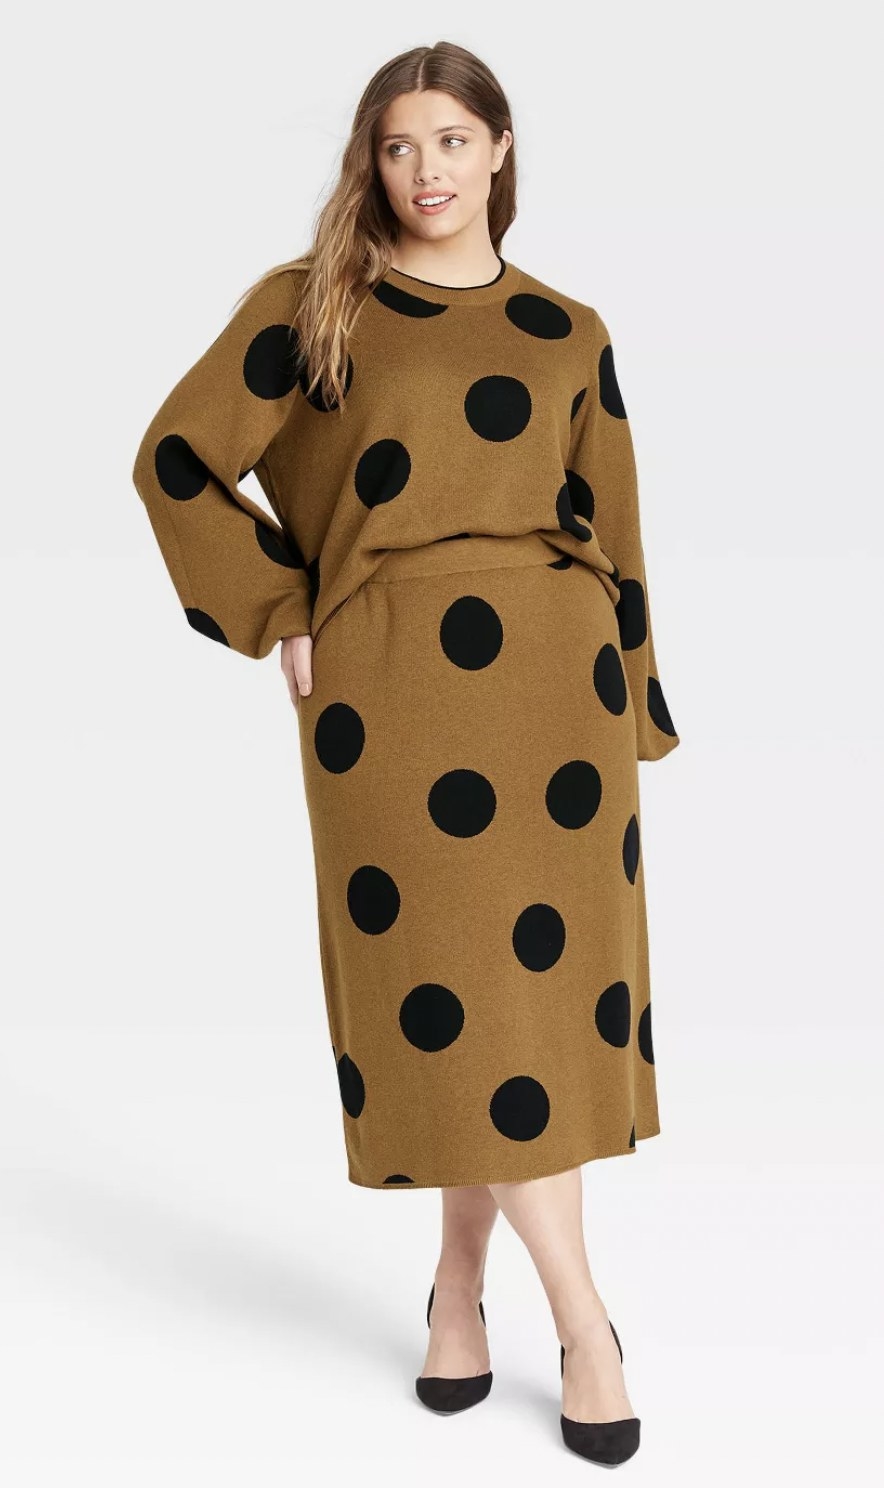 the skirt in a brown color with large black polka dots